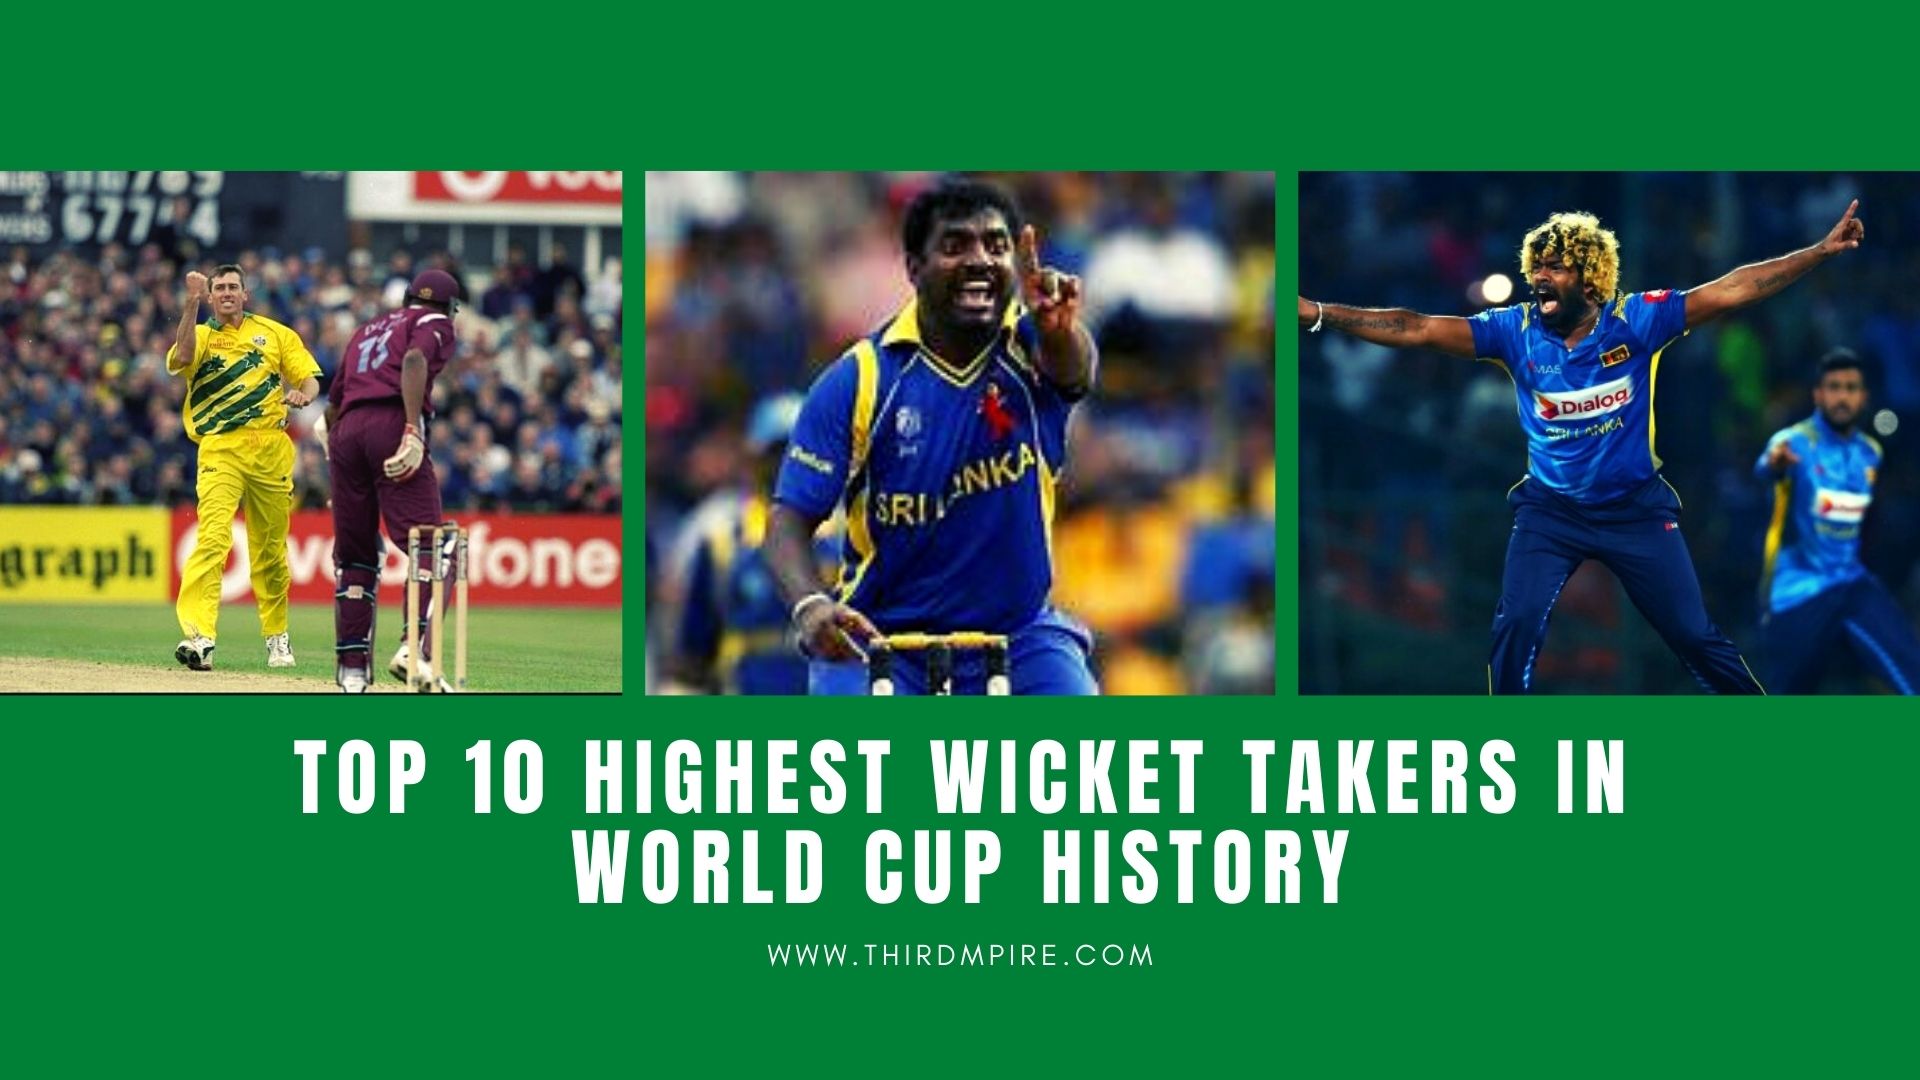 Top 10 Highest Wicket Takers in World Cup History